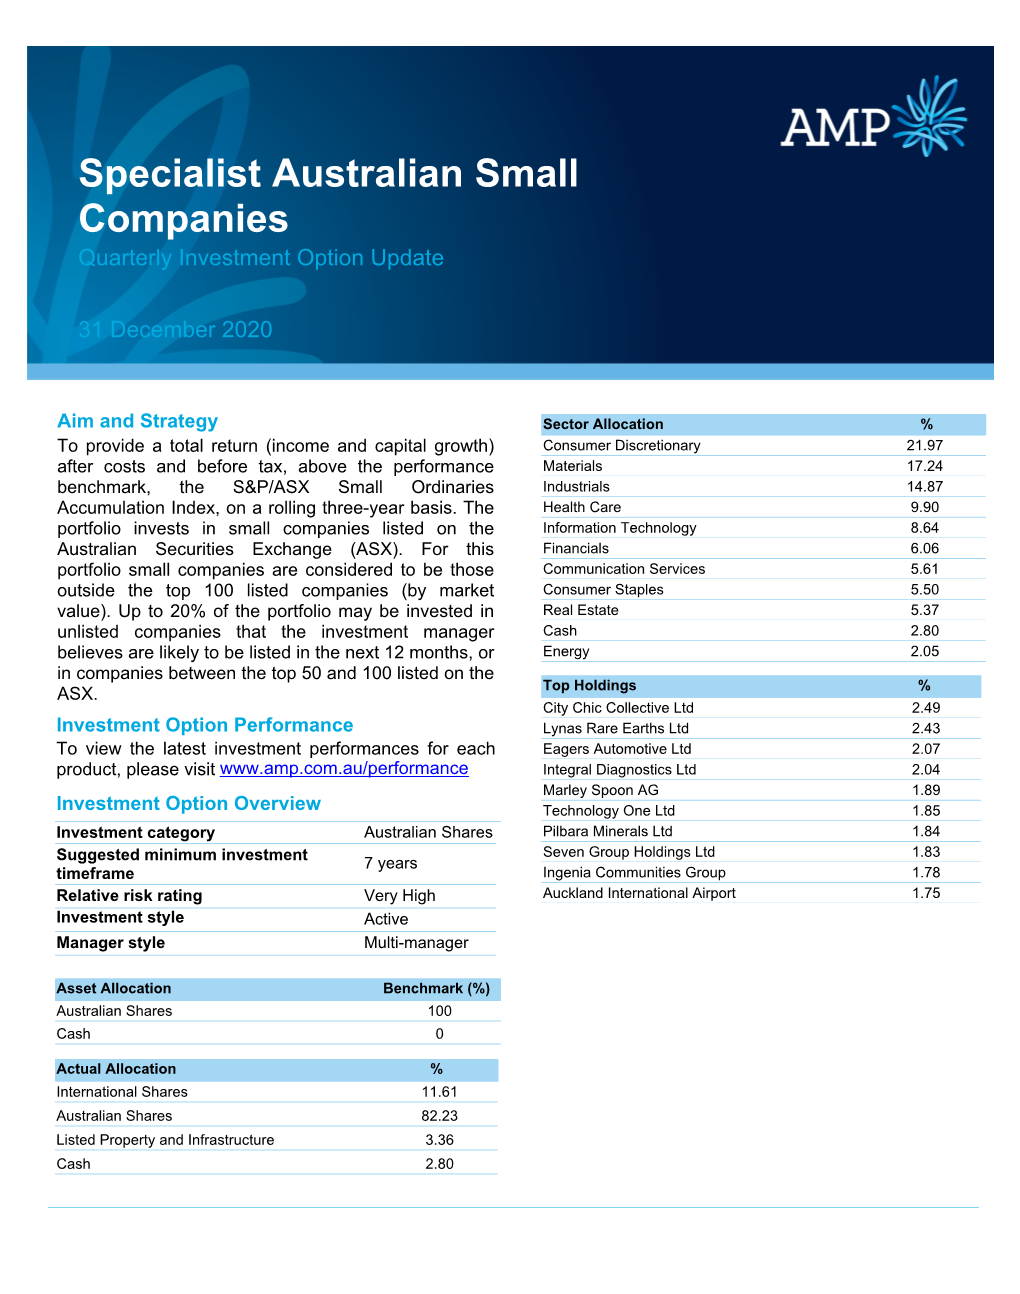 Specialist Australian Small Companies Quarterly Investment Option Update